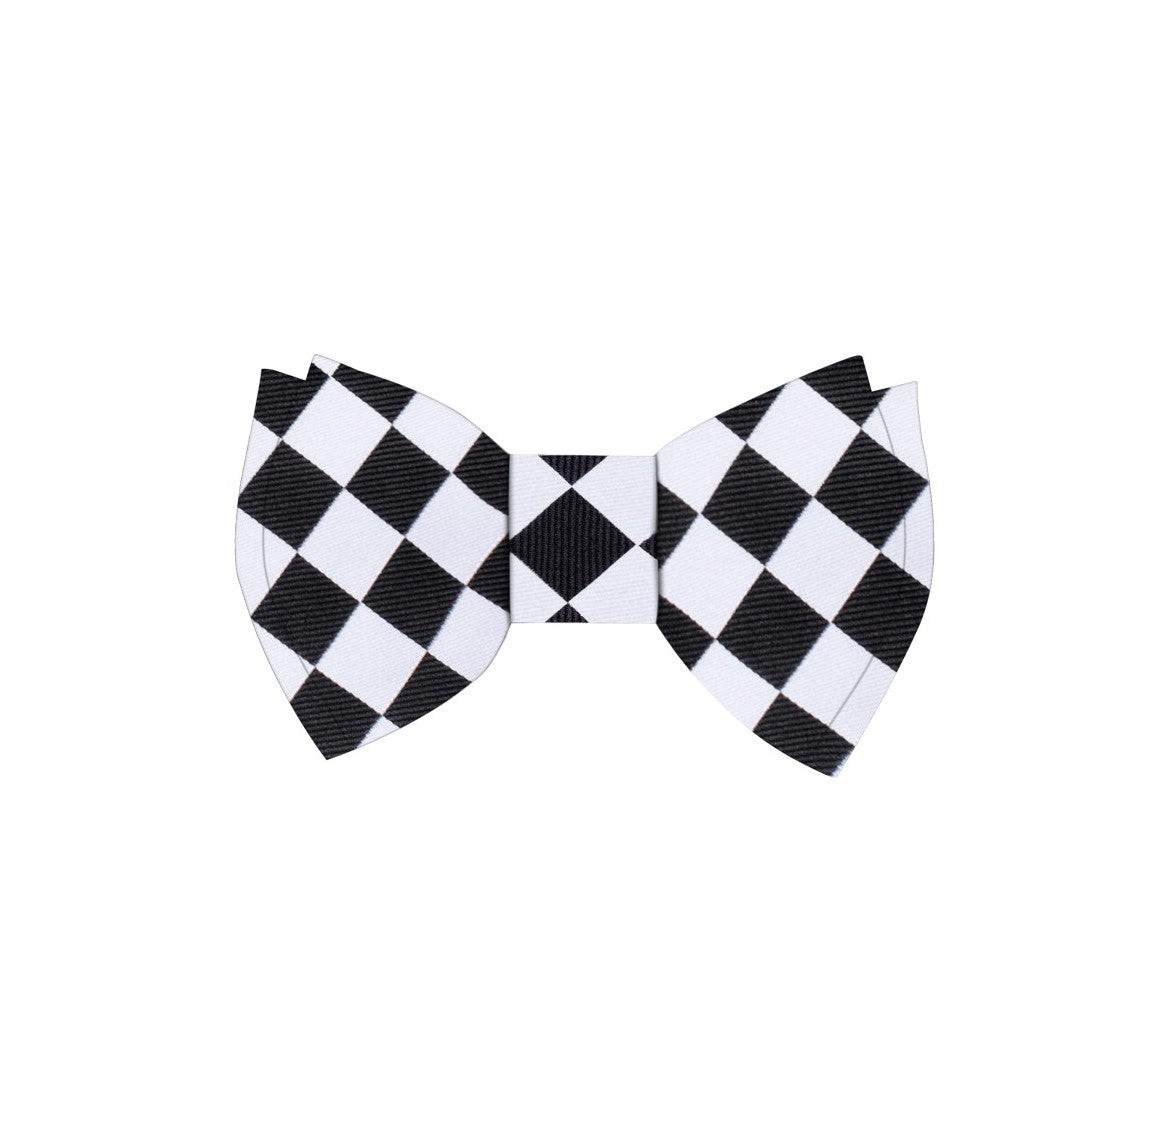 A Light Grey and Black Checkerboard Pattern Silk Self Tie Bow Tie